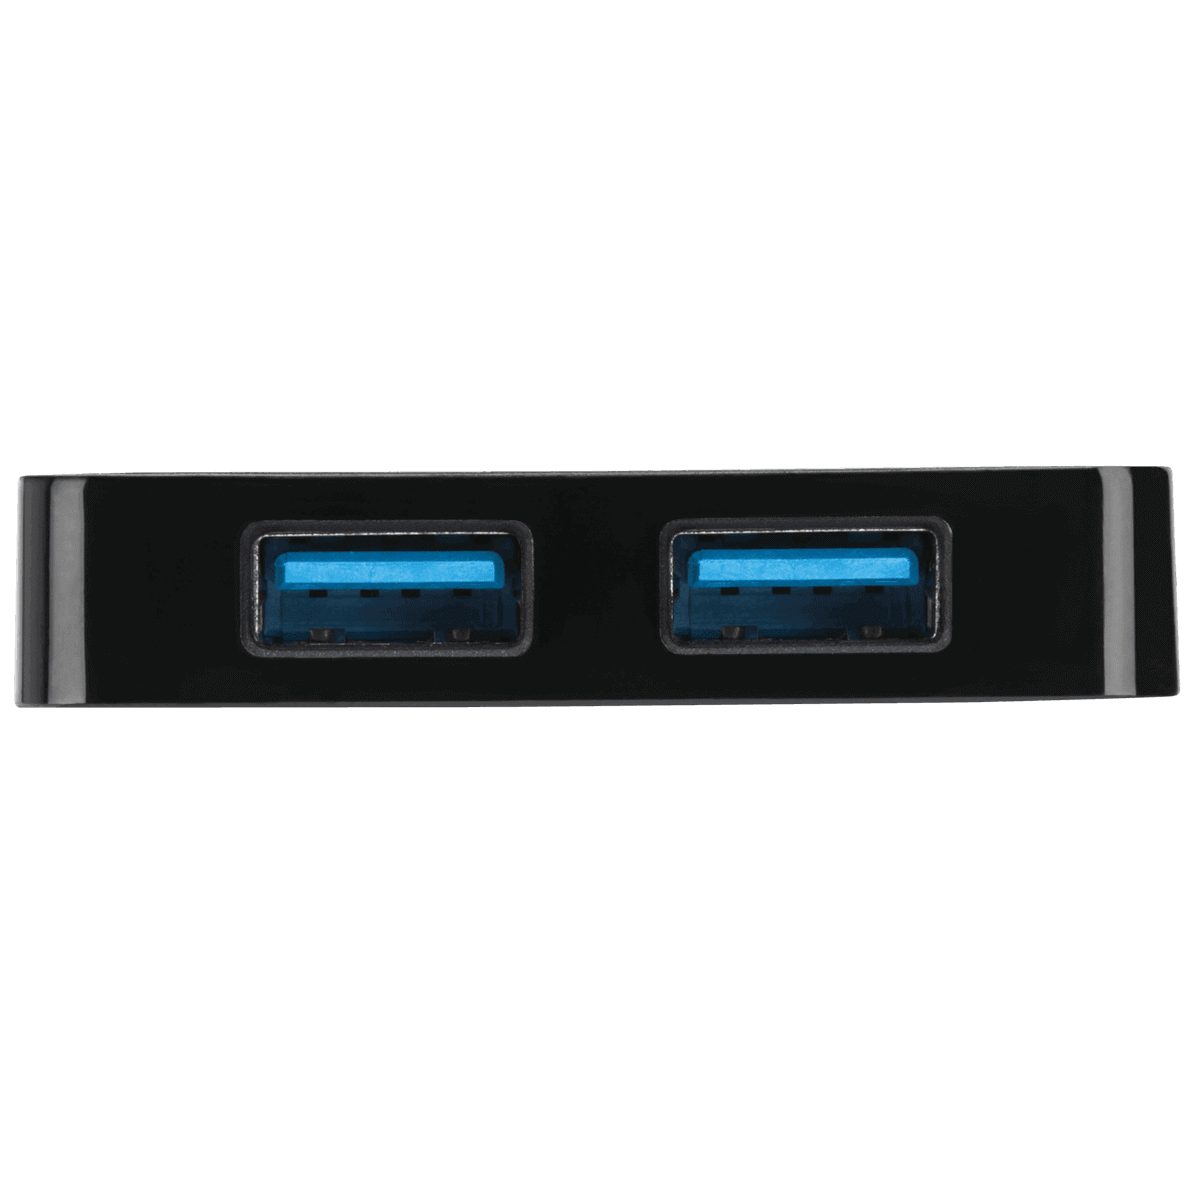 4-Port USB Hub, Connect & Charge up to 4 Devices